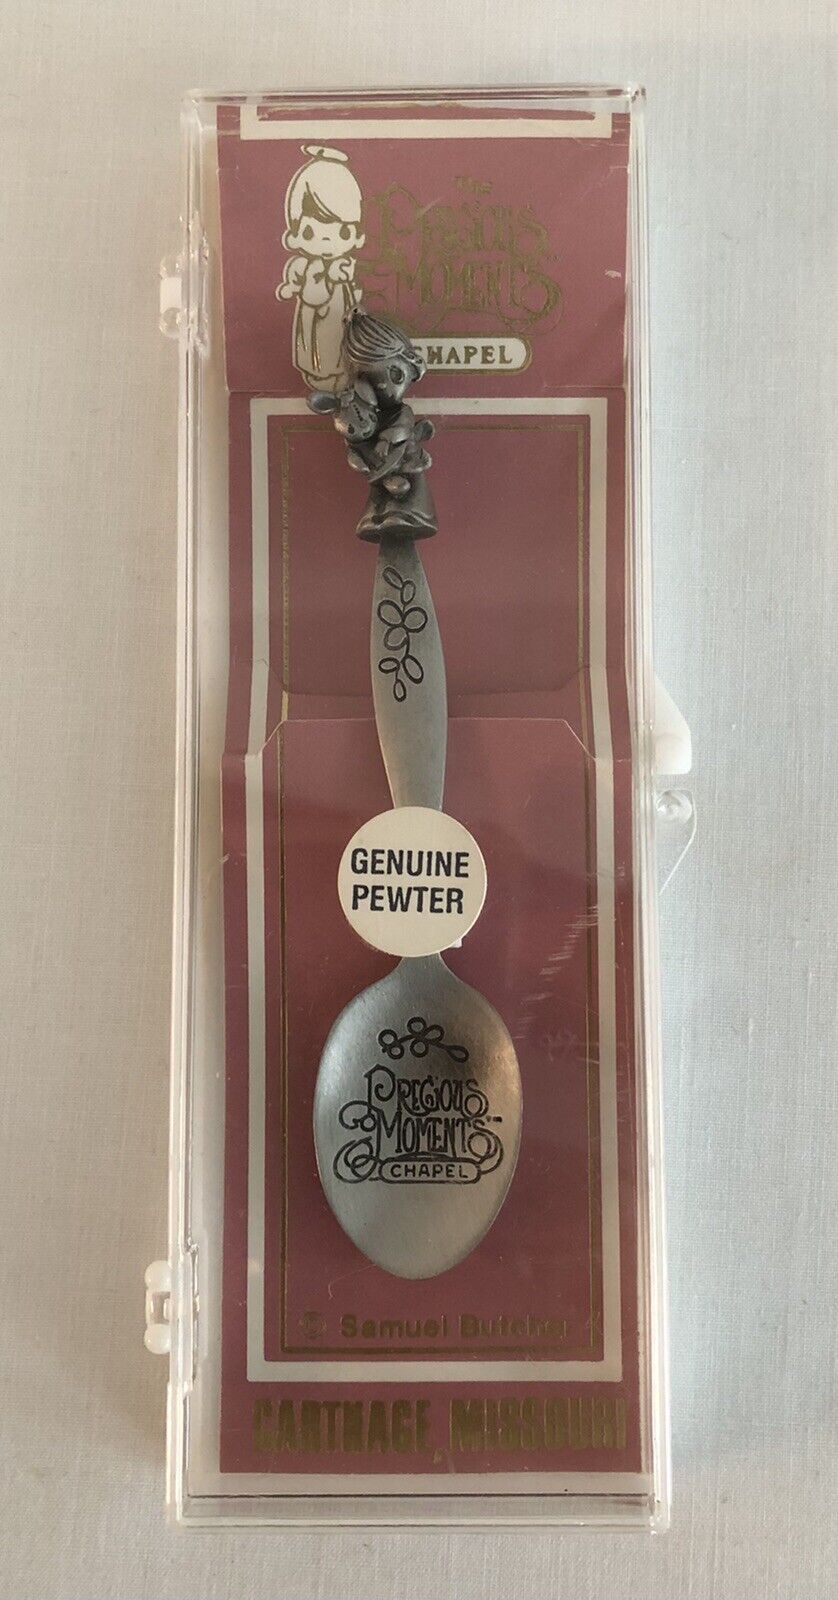 The Precious Moments Chapel Genuine Pewter Collectors Spoon by Samuel Butcher